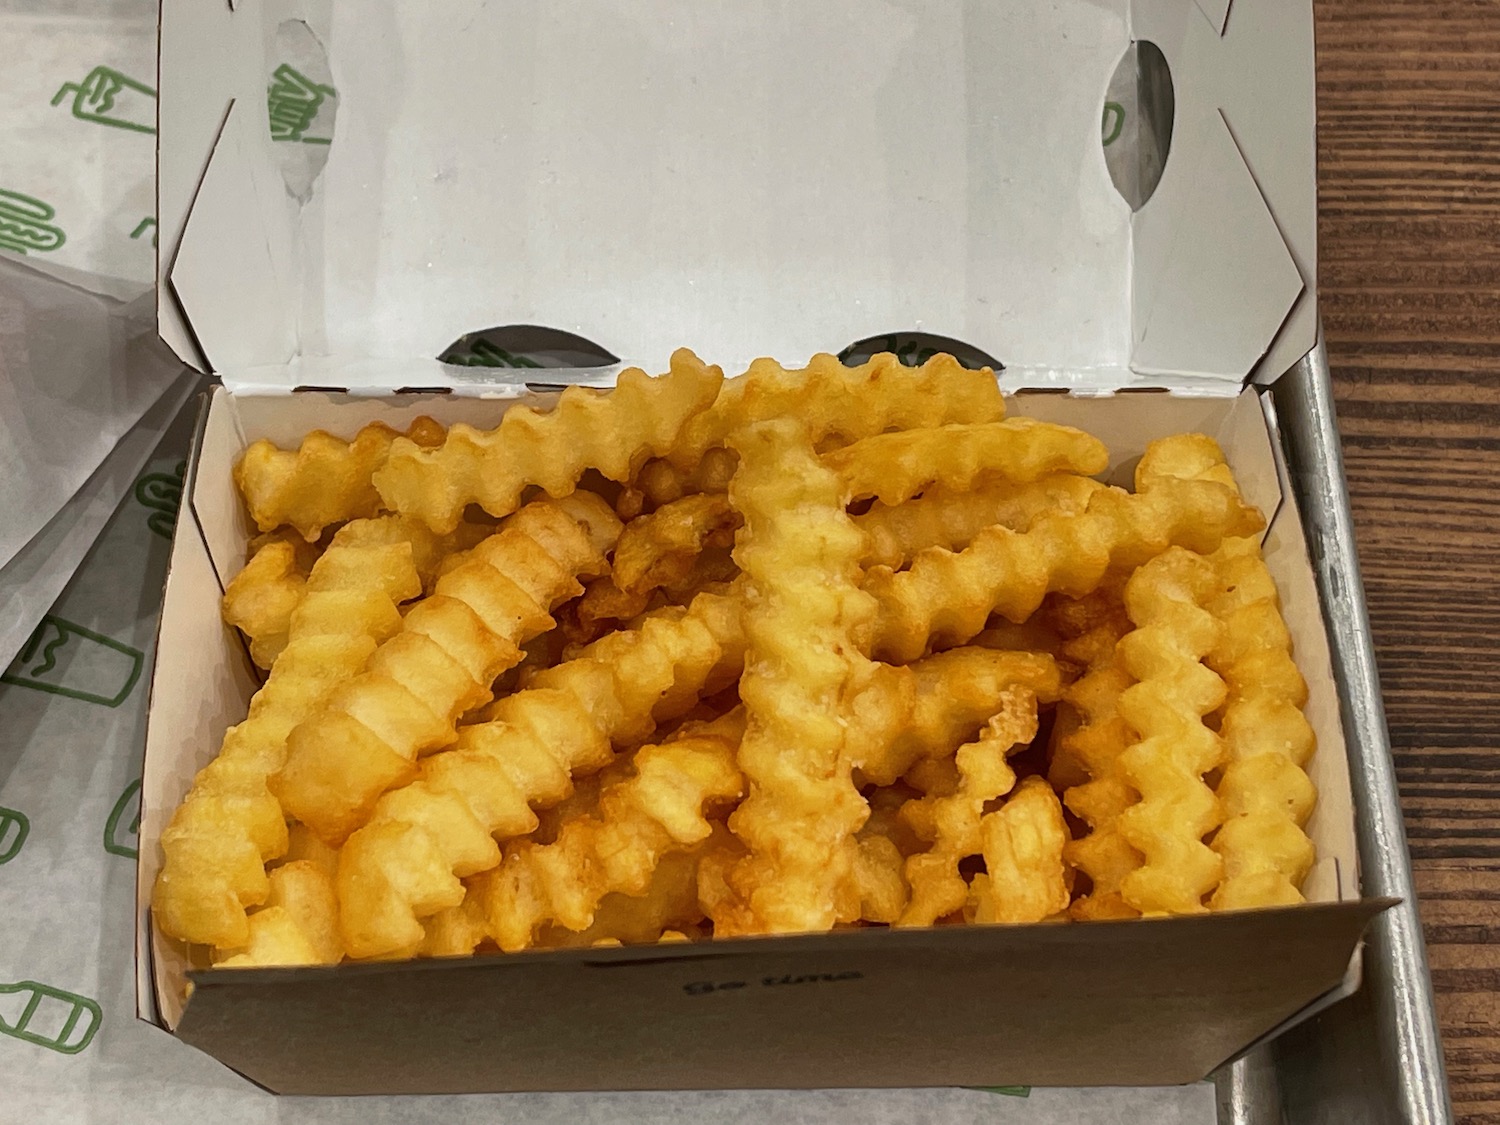 a box of french fries